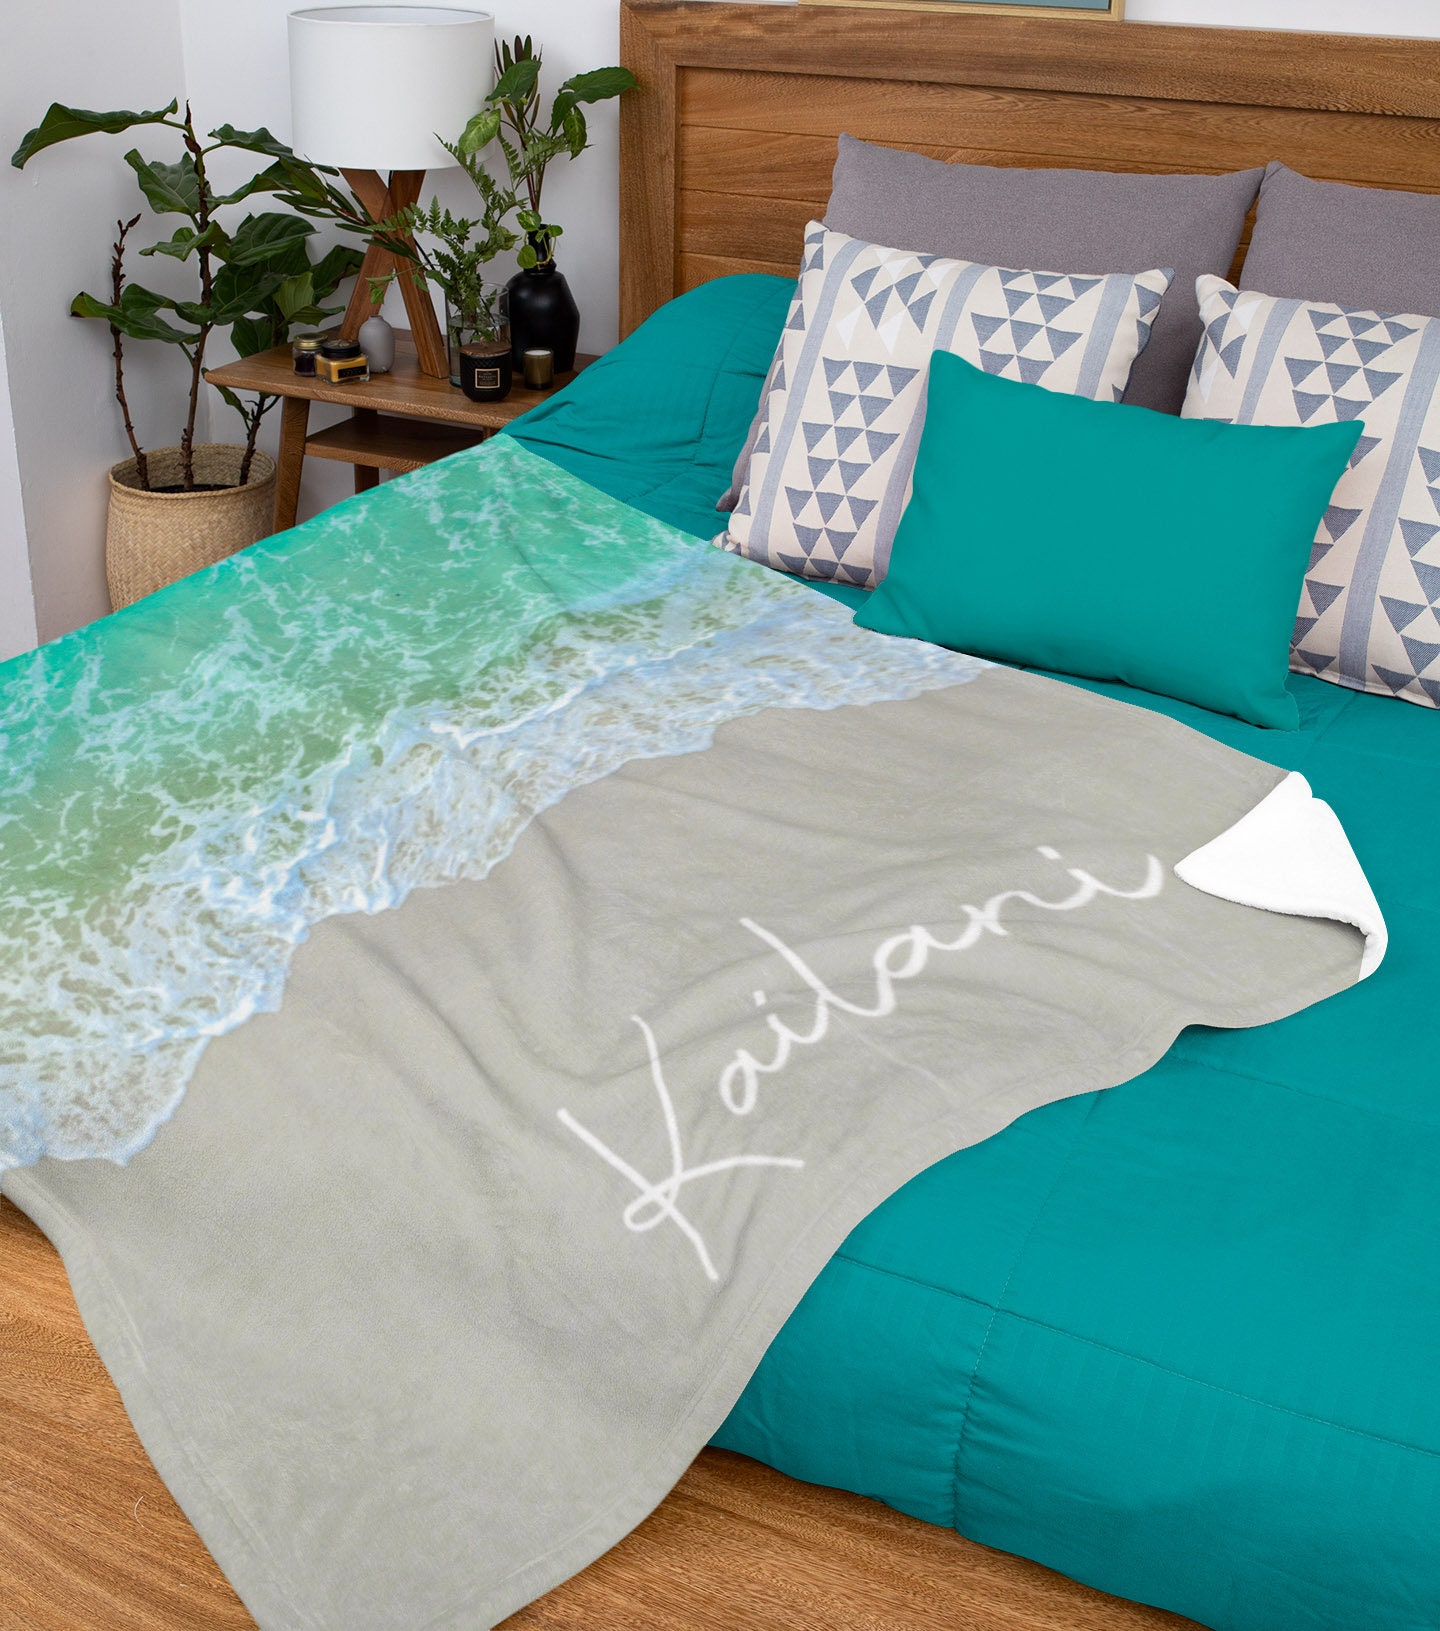 Reflections on Water View Blue Green Blanket for Couch, Super Soft Plush  Throw Blankets,Fur Blanket …See more Reflections on Water View Blue Green